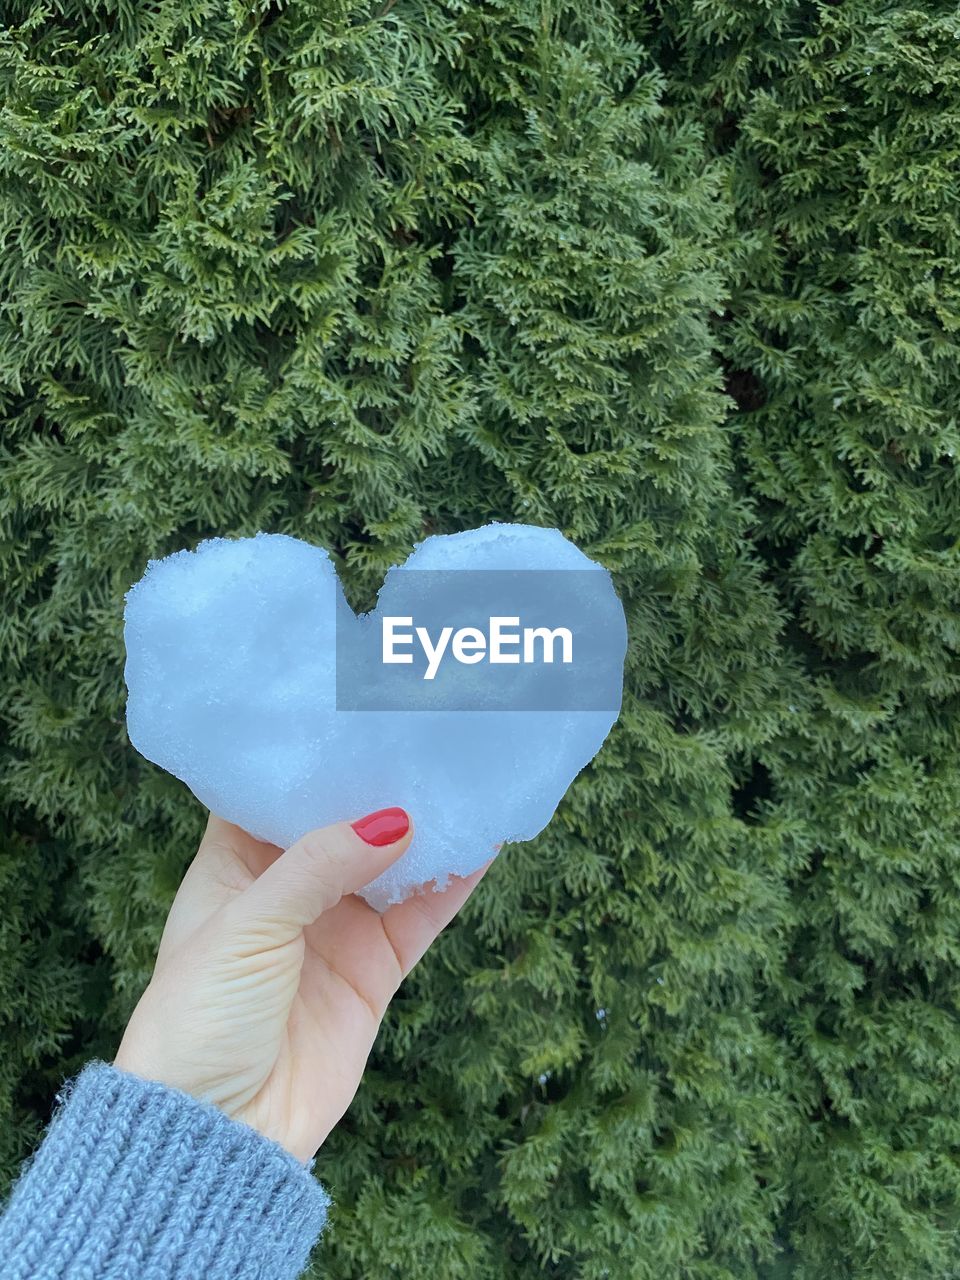 CROPPED IMAGE OF WOMAN HOLDING HEART SHAPE OF TREE